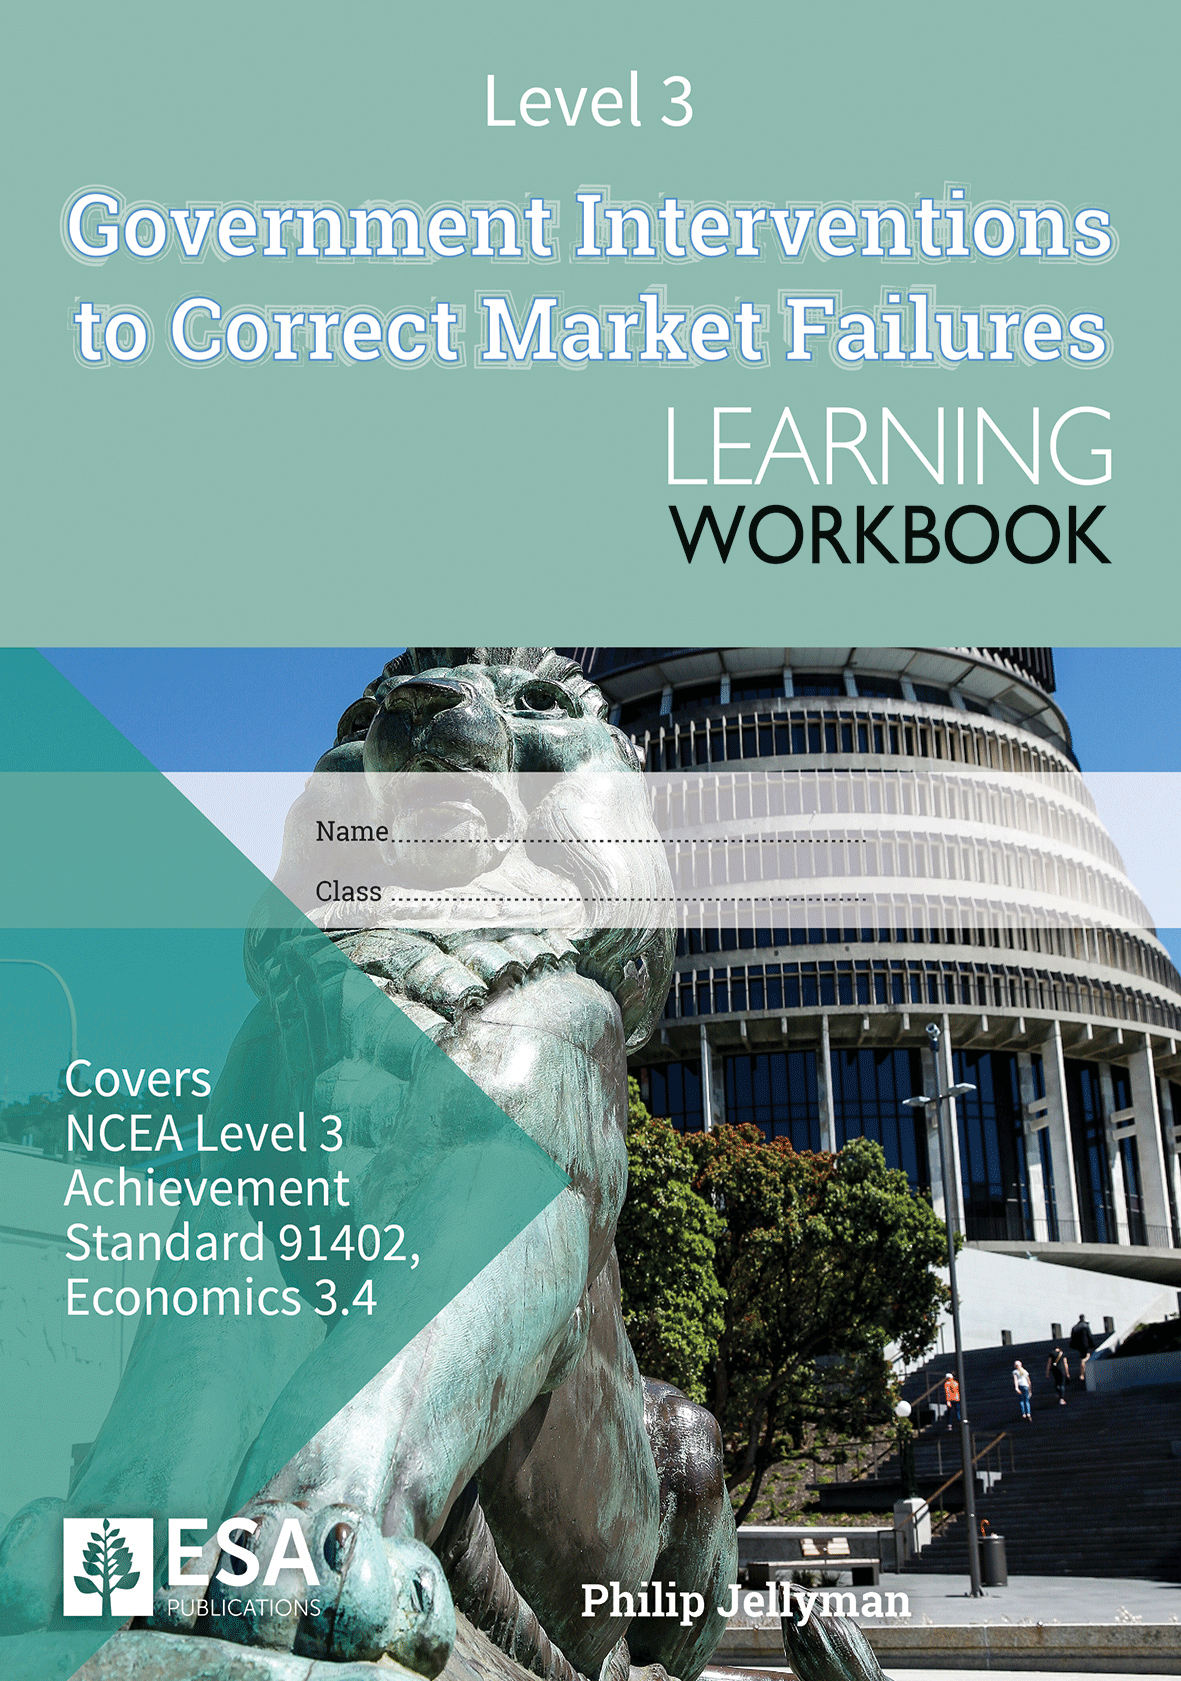 Level 3 Government Interventions to Correct Market Failures 3.4 Learning Workbook - SPECIAL (damaged stock at $5 each)